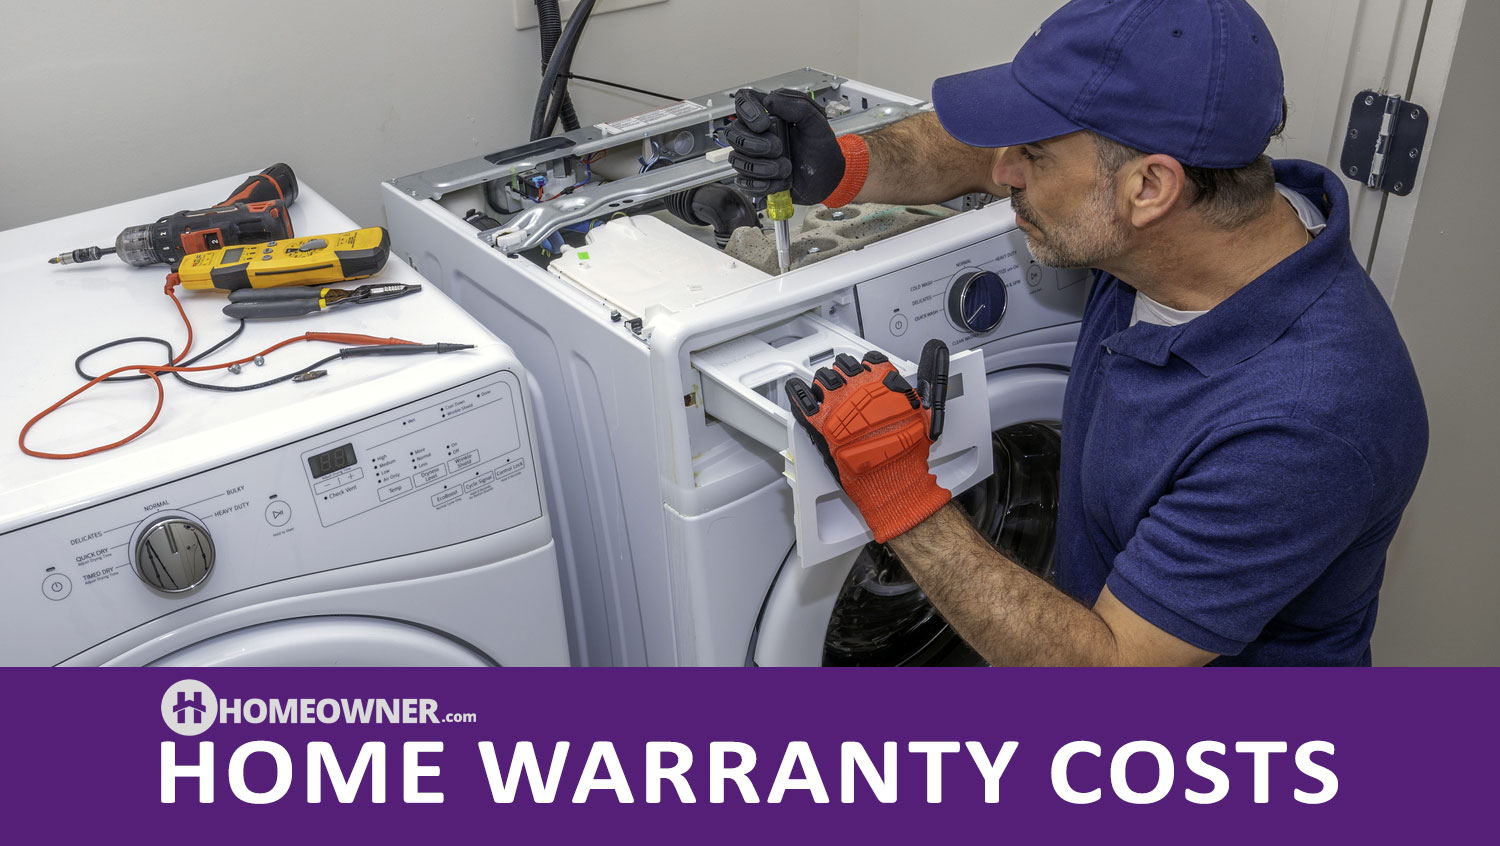 How Much Does a Home Warranty Cost?